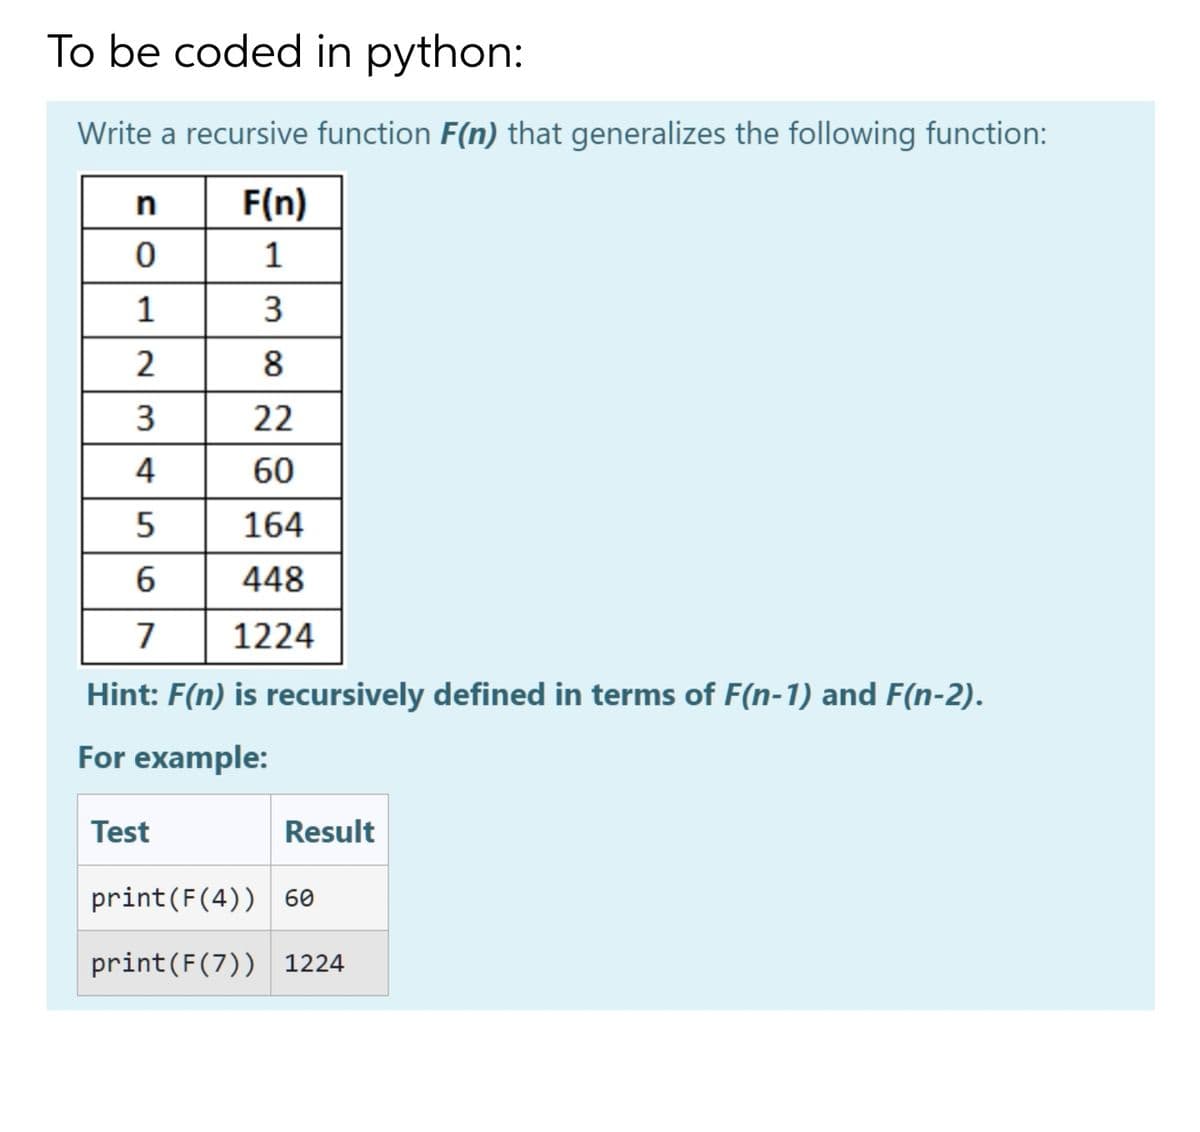 To be coded in python:
Write a recursive function F(n) that generalizes the following function:
F(n)
1
3
8
22
60
164
448
1224
n
0
1
2
3
4
5
6
7
Hint: F(n) is recursively defined in terms of F(n-1) and F(n-2).
For example:
Test
print (F(4)) 60
print (F(7)) 1224
Result